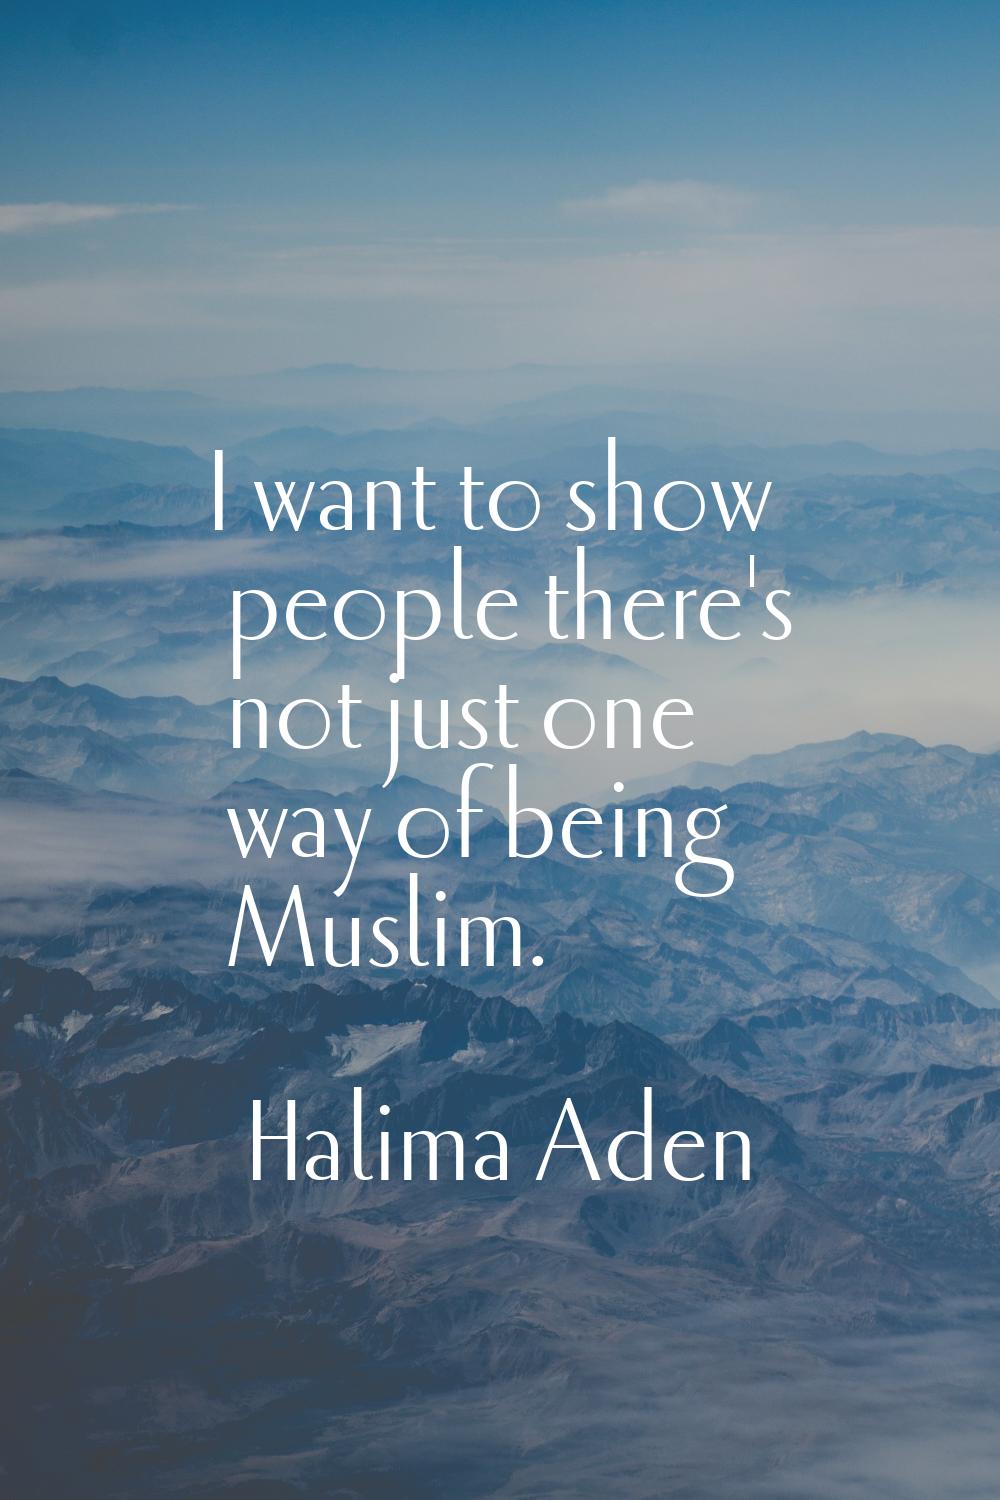 I want to show people there's not just one way of being Muslim.